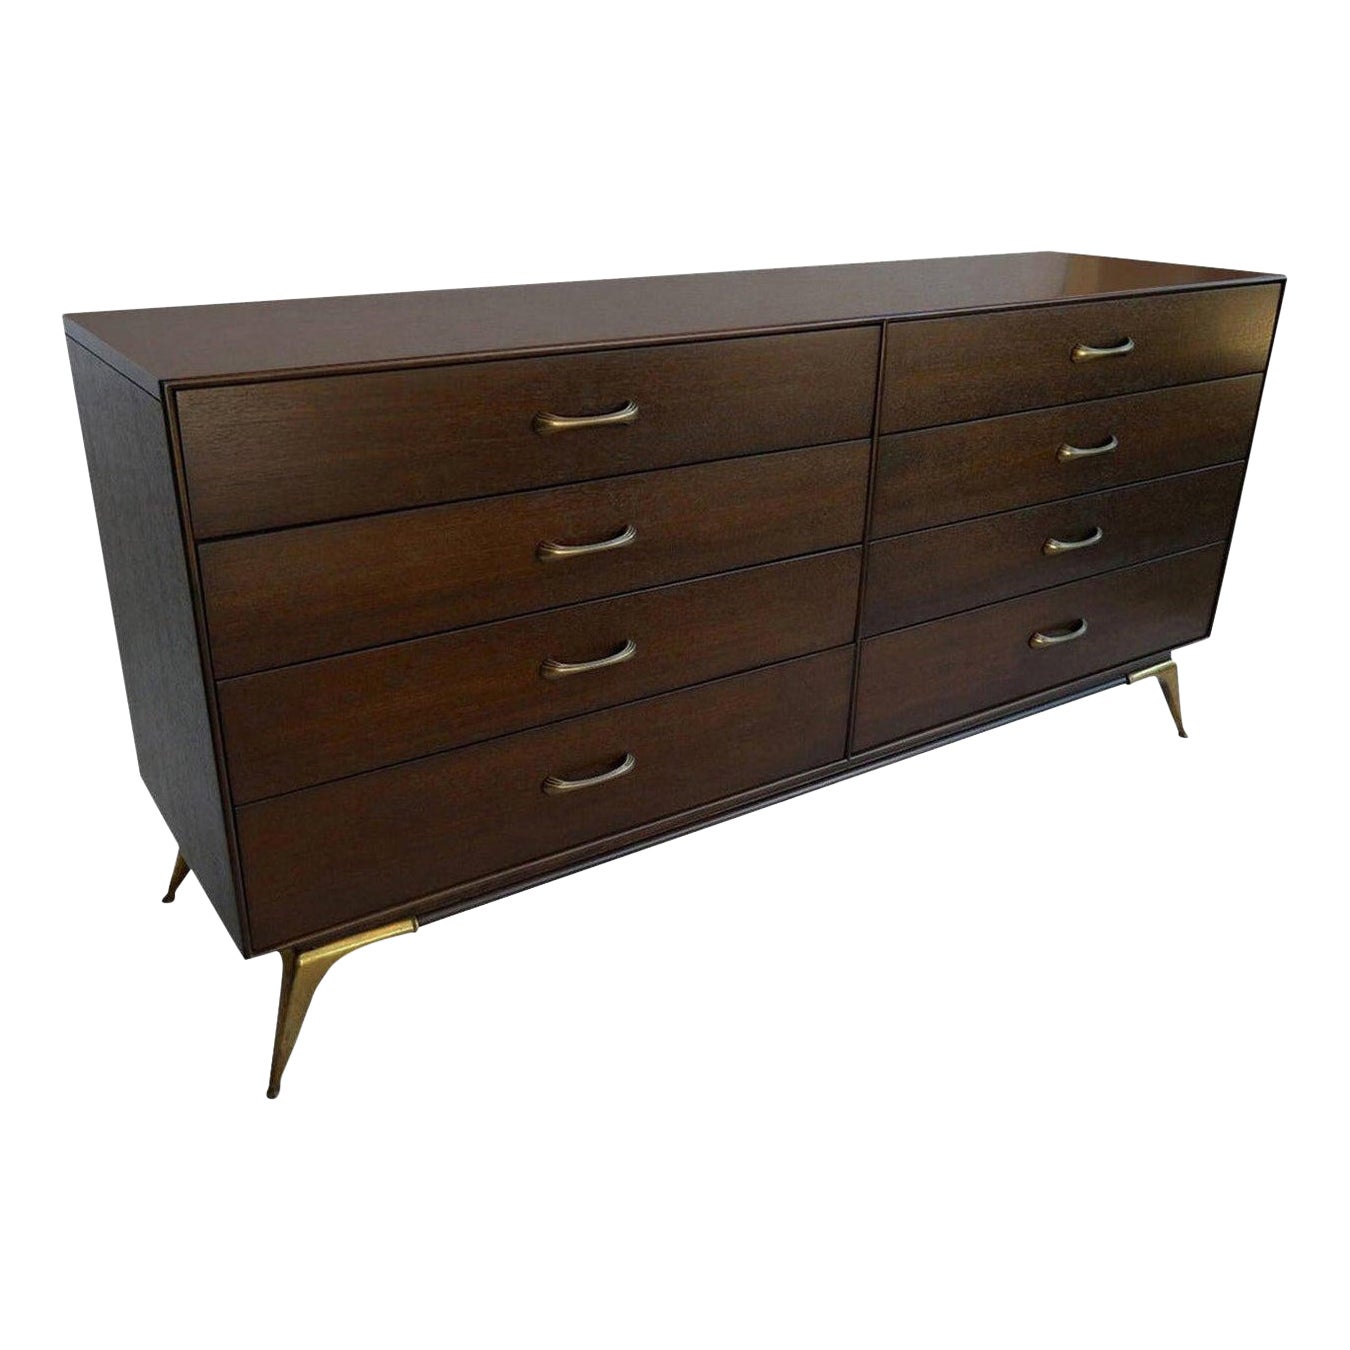 1960s, RWAY Brown Wood Dresser or Sideboard with Brass Accents